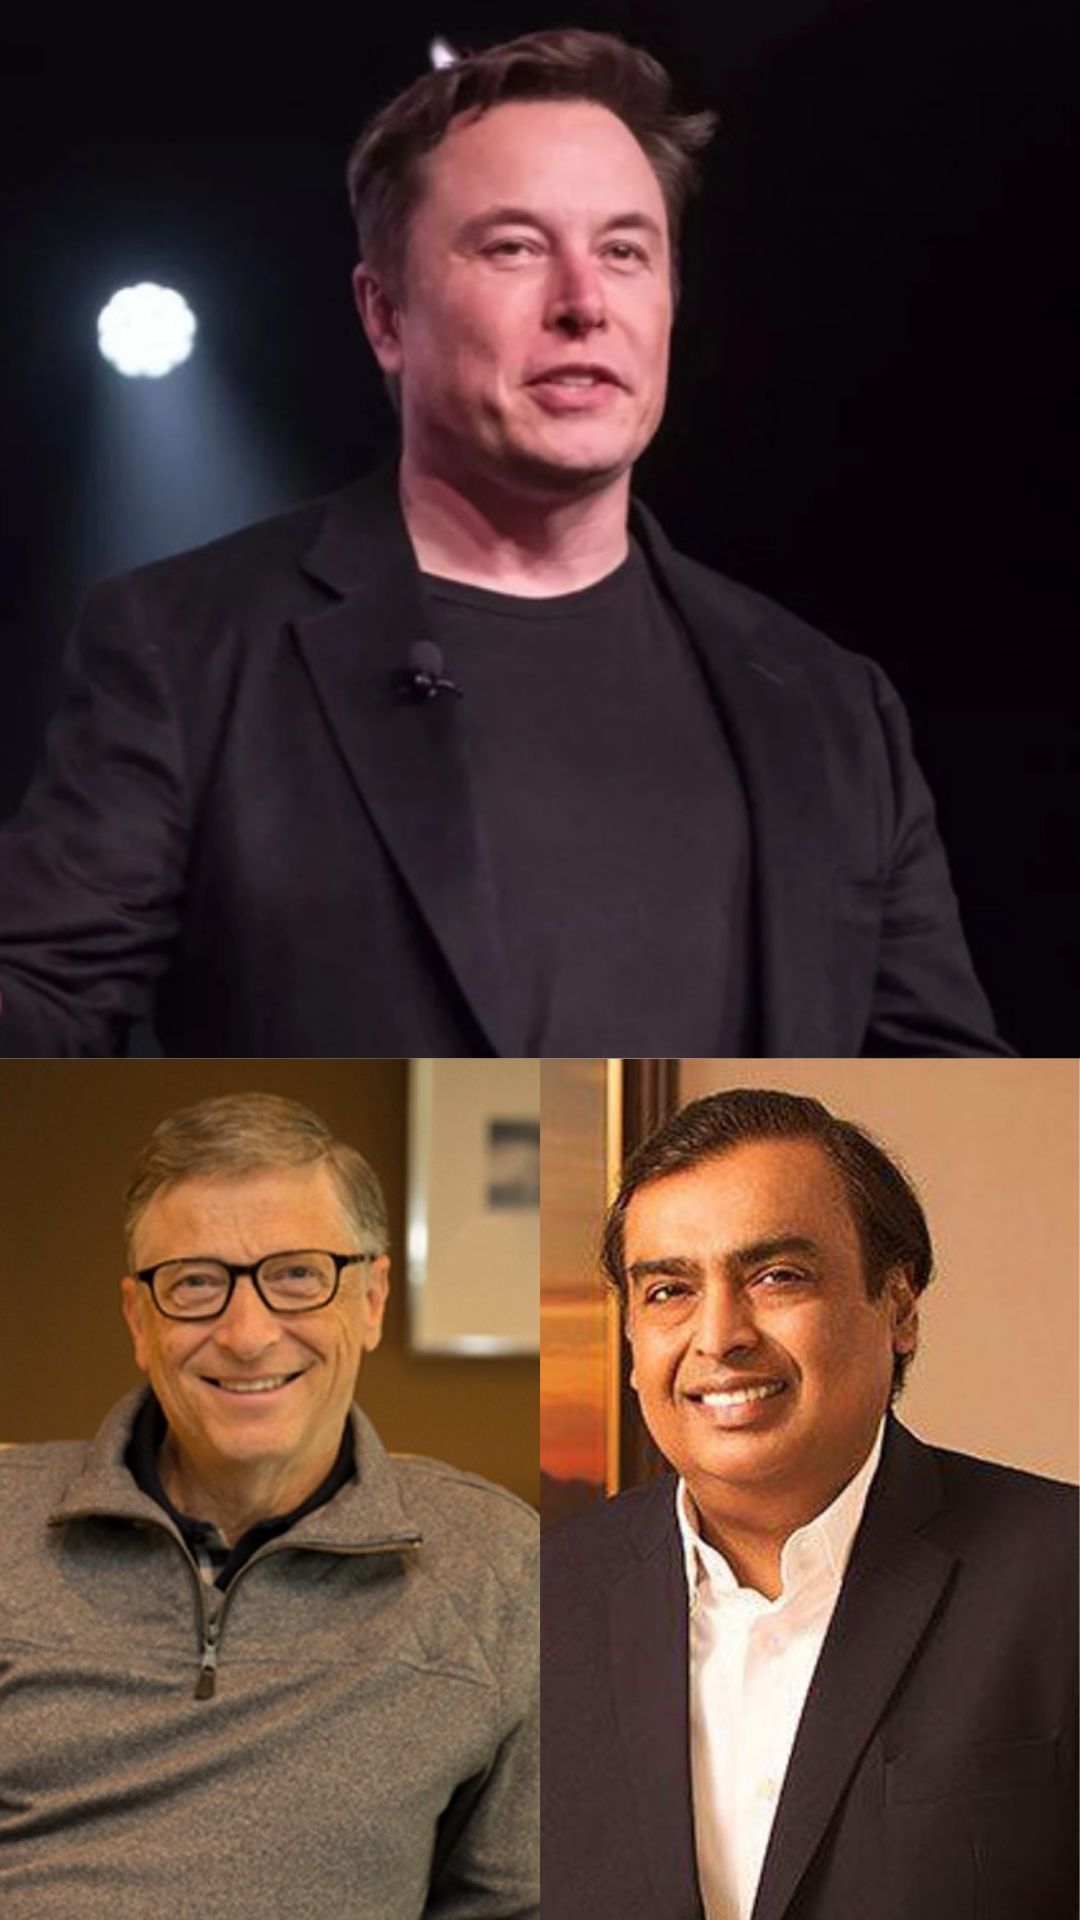 Top 10 richest people in the world - Updated 2023 list